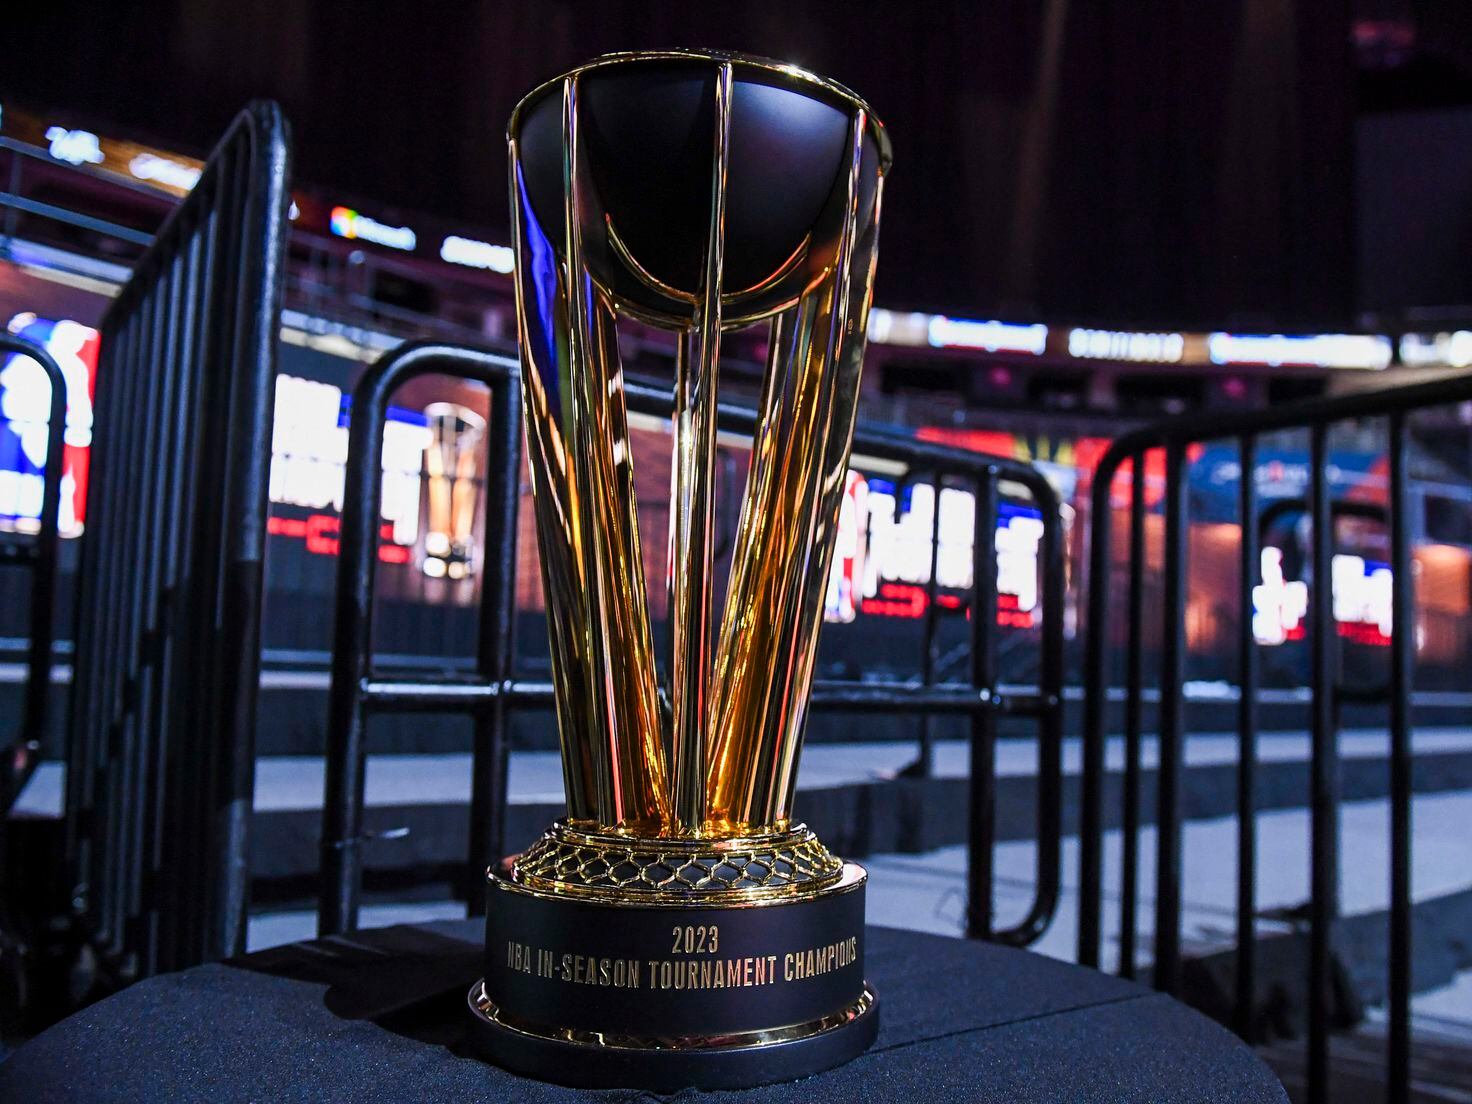 NBA unveils the NBA Cup, a new in-season tournament inspired by